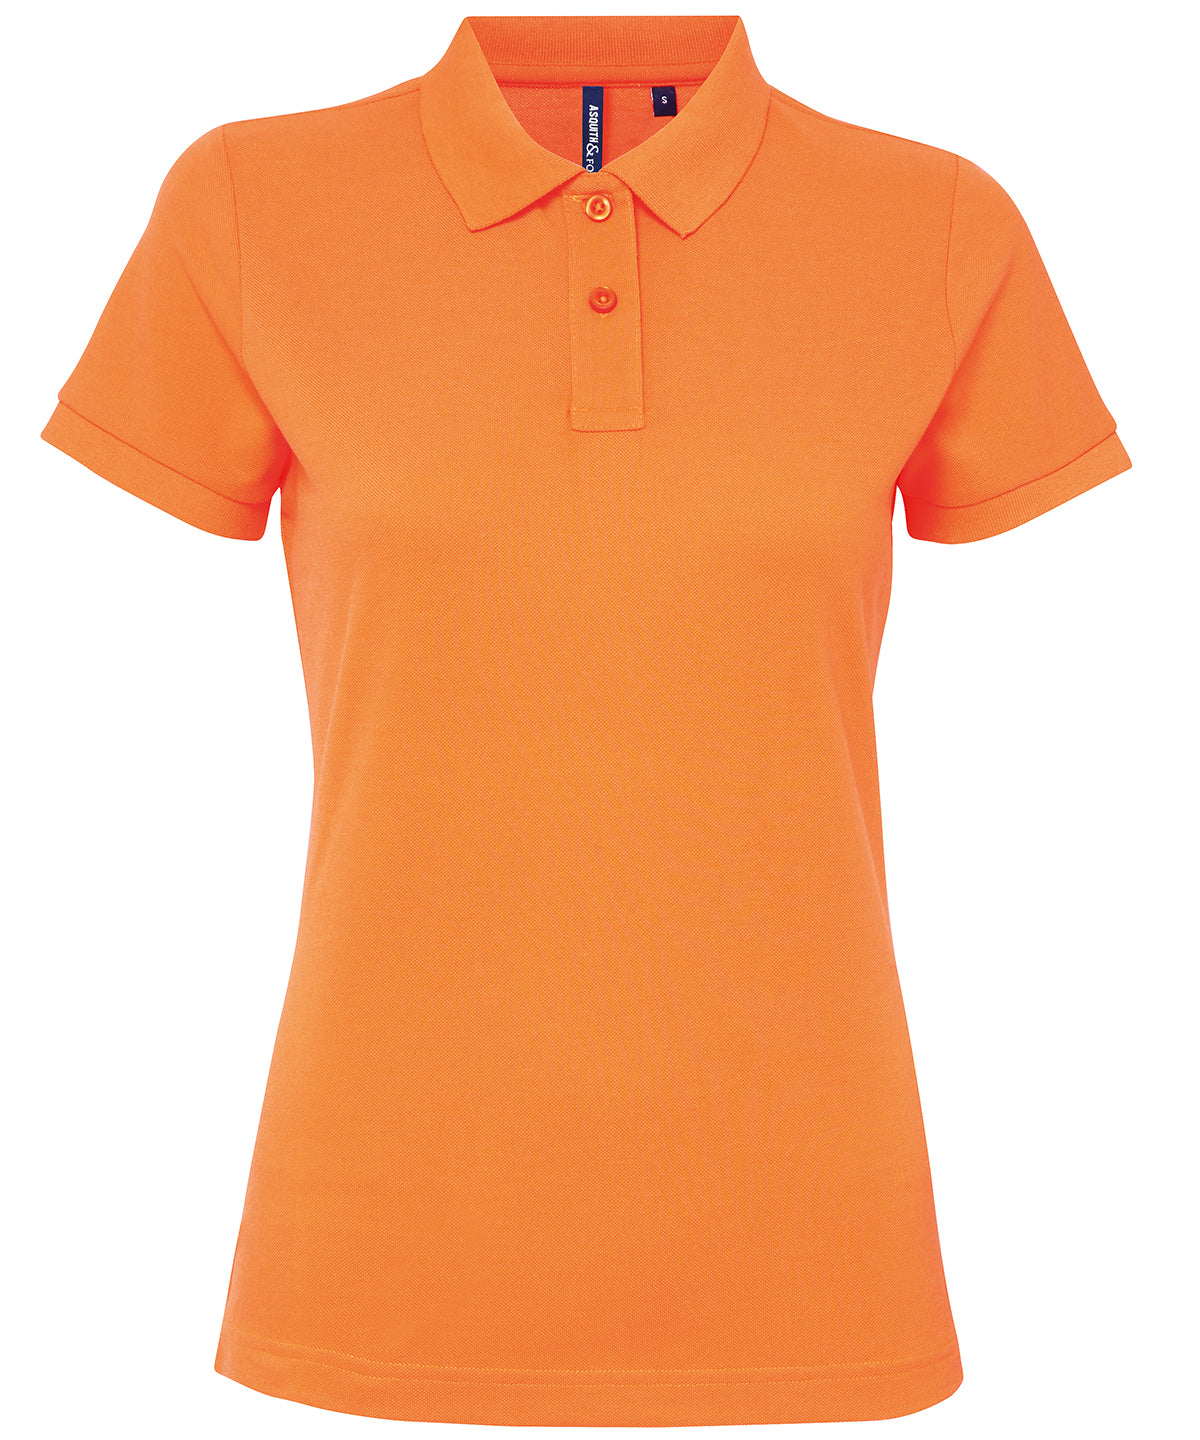 Personalised Polo Shirts - Royal Asquith & Fox Women’s polycotton blend polo